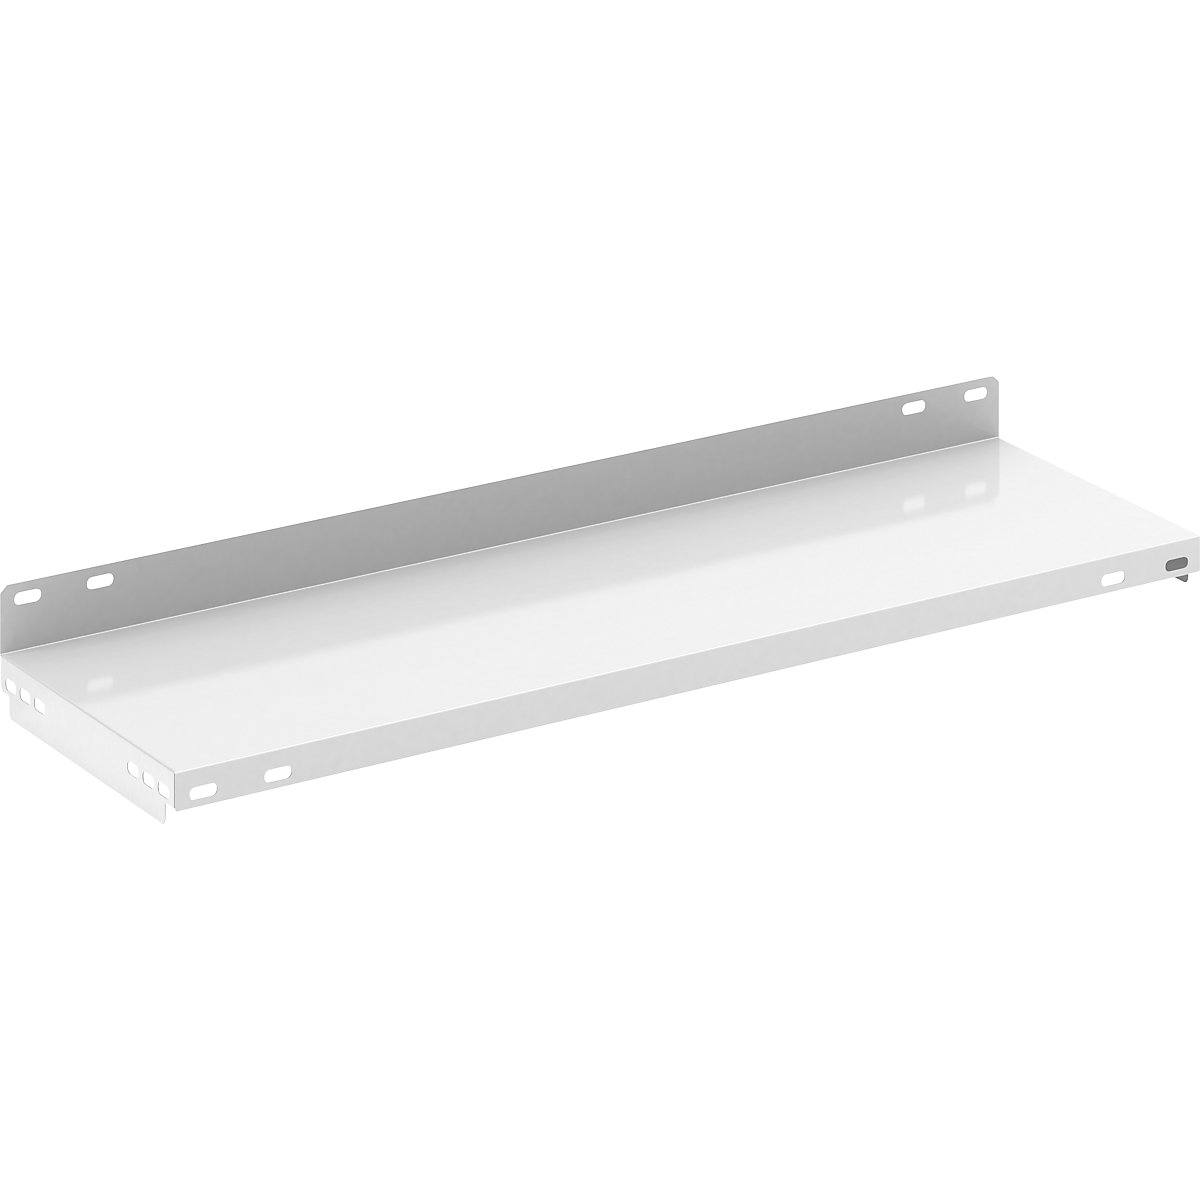 Shelf with supports – hofe